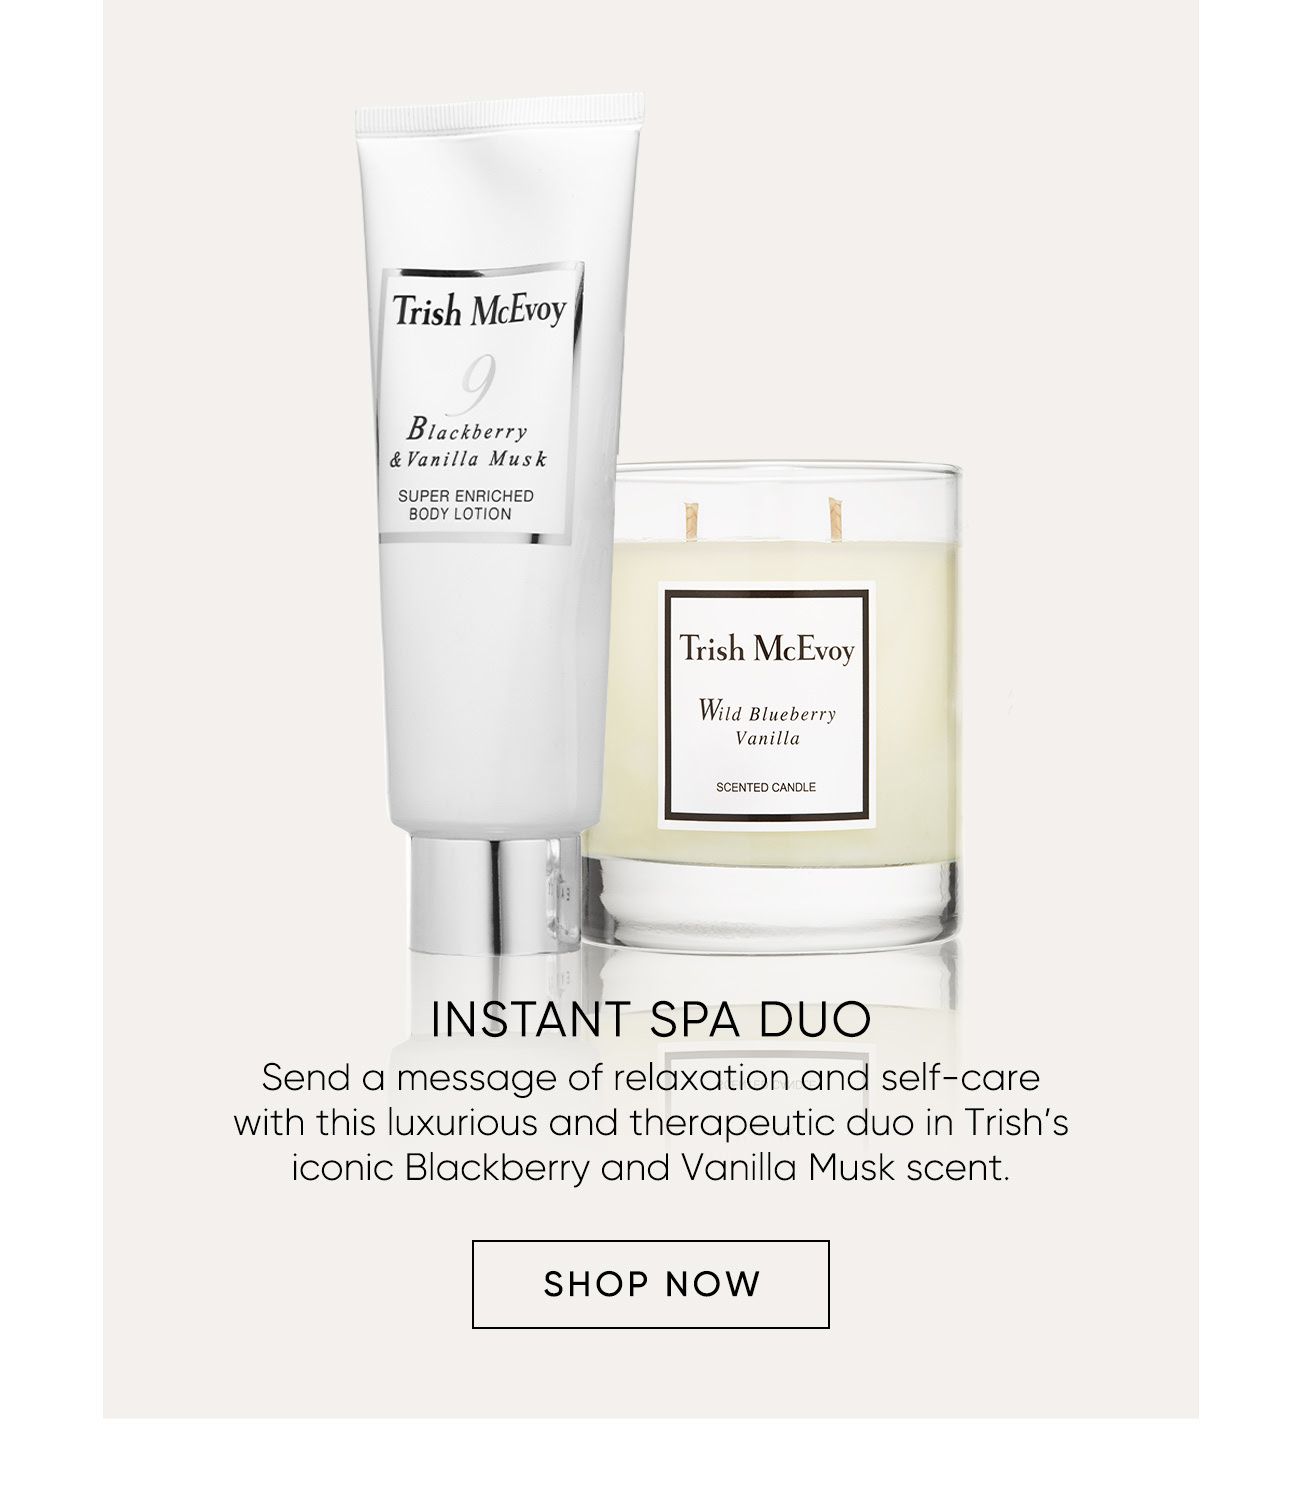 INSTANT SPA DUO